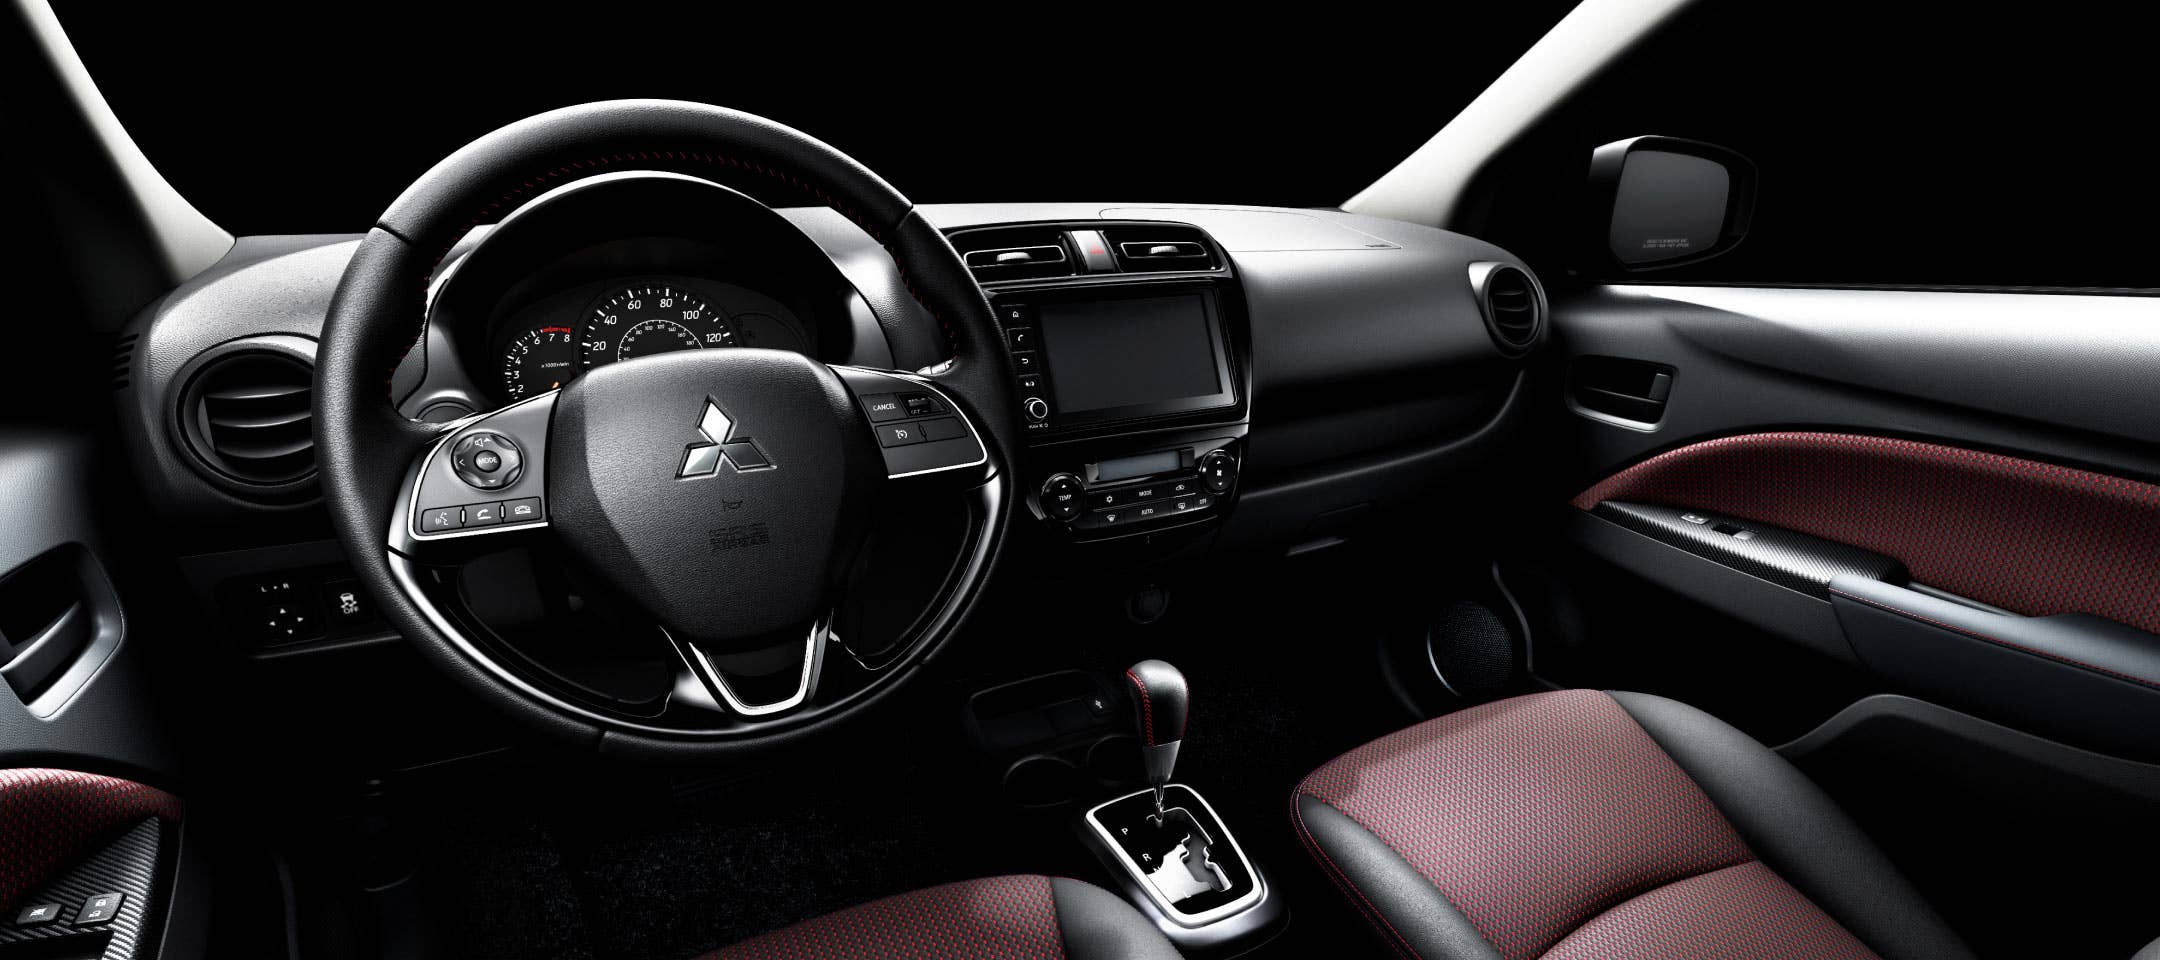 Black and red interior in the 2022 & 2023 Mitsubishi Mirage hatchback